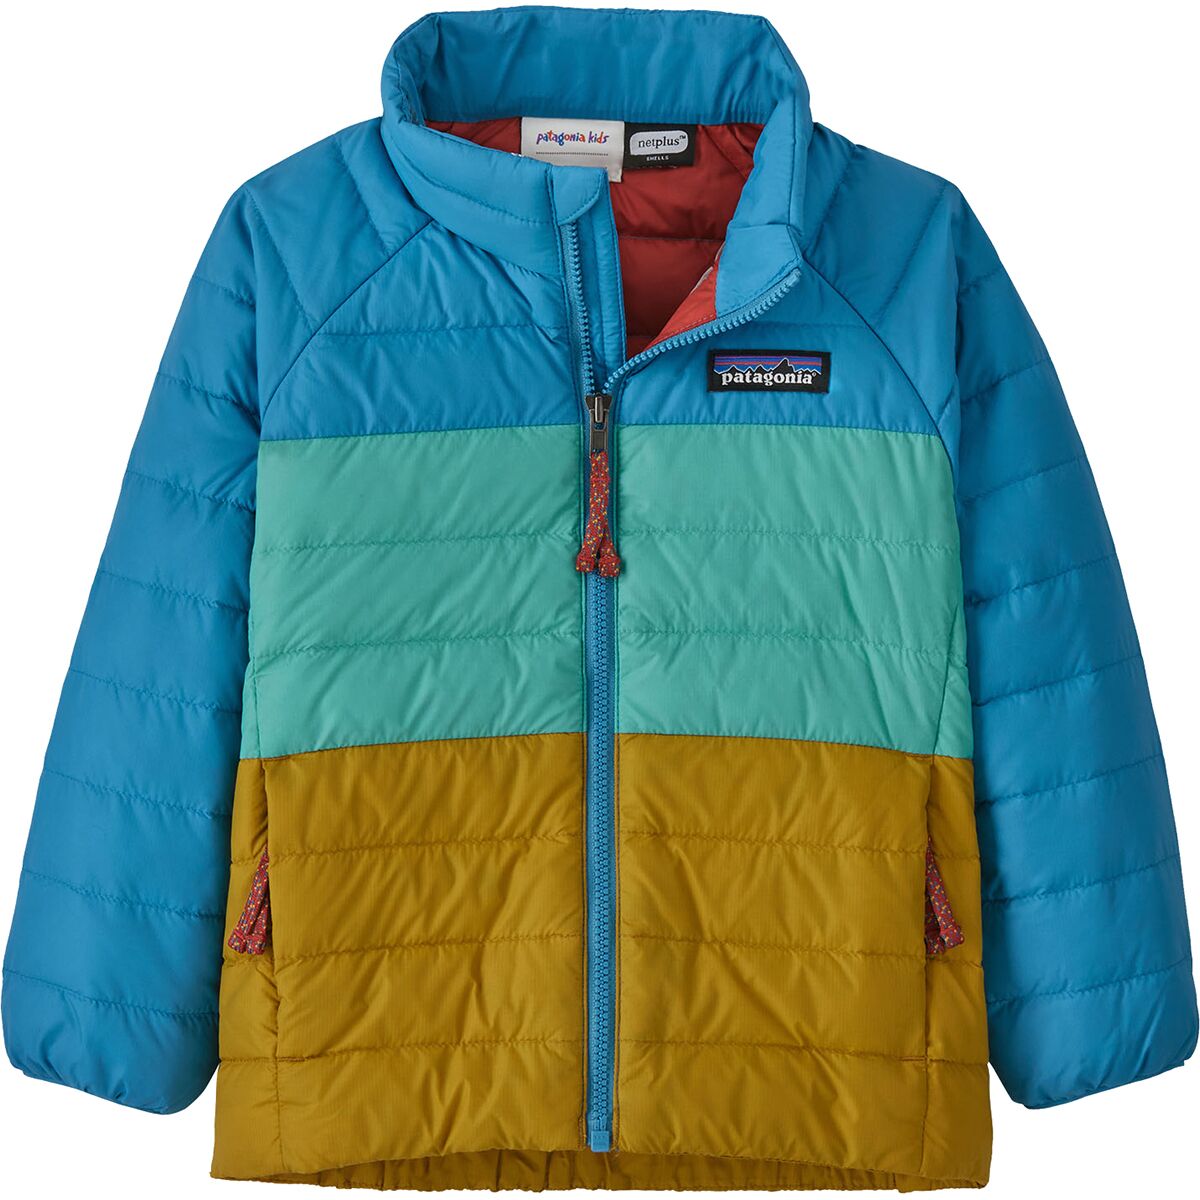 Patagonia Down Sweater Jacket - Infants' product image